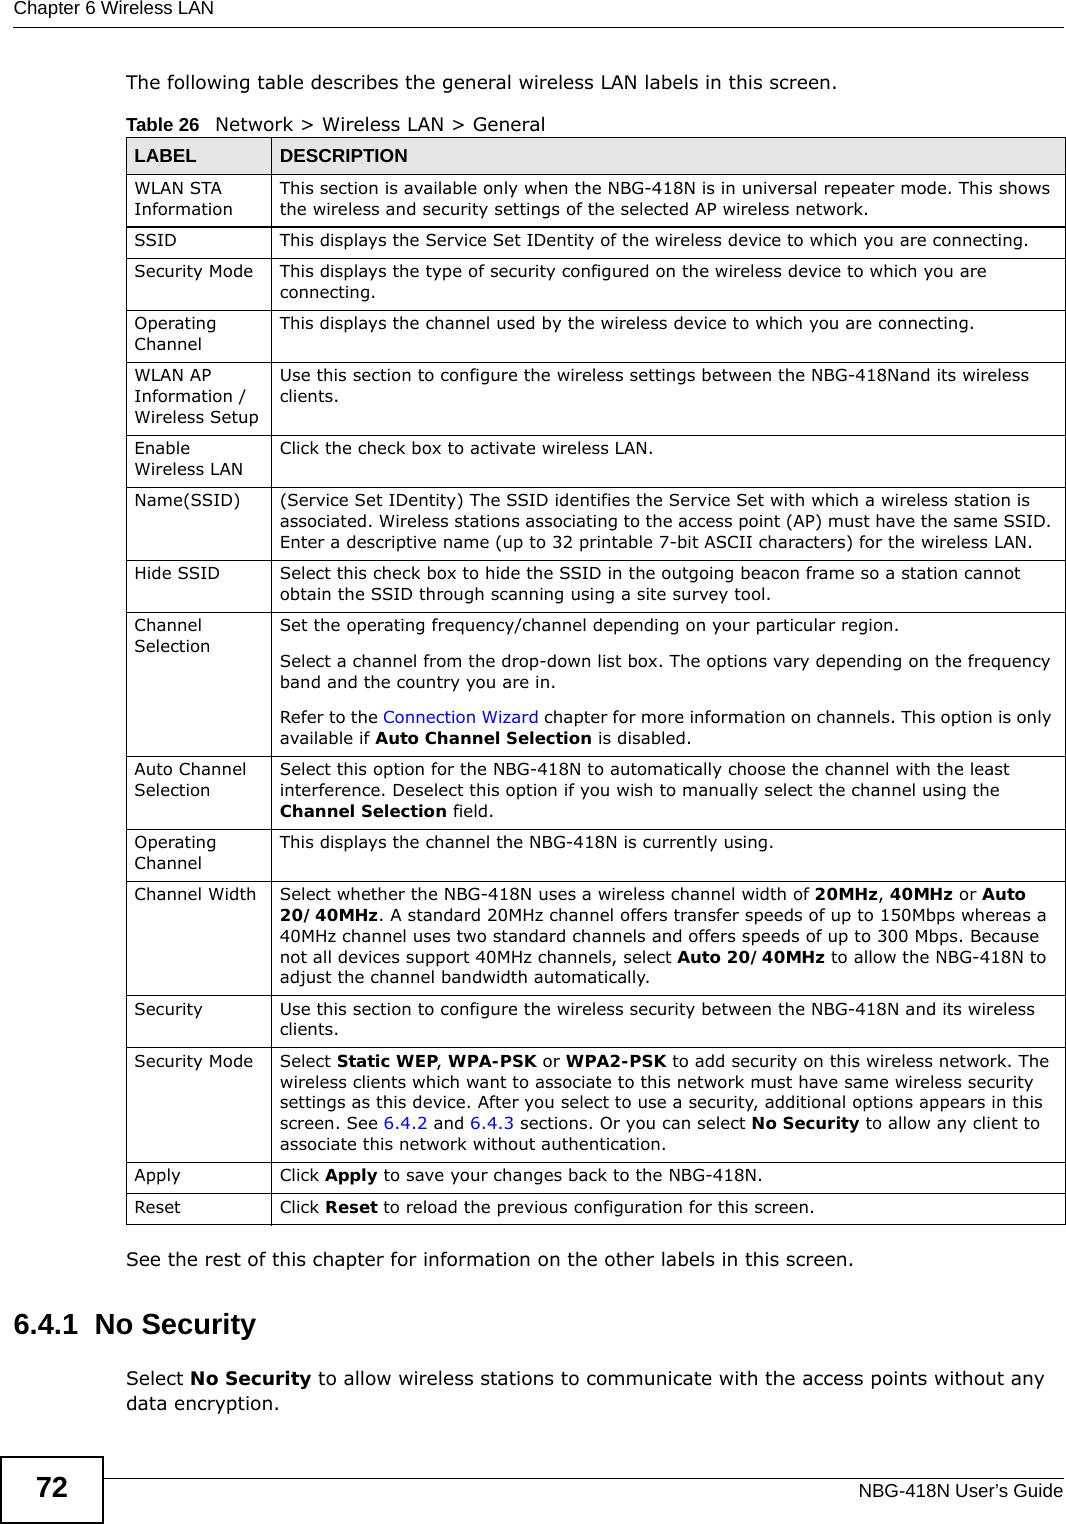 Chapter 6 Wireless LANNBG-418N User’s Guide72The following table describes the general wireless LAN labels in this screen.See the rest of this chapter for information on the other labels in this screen. 6.4.1  No SecuritySelect No Security to allow wireless stations to communicate with the access points without any data encryption. Table 26   Network &gt; Wireless LAN &gt; GeneralLABEL DESCRIPTIONWLAN STA InformationThis section is available only when the NBG-418N is in universal repeater mode. This shows the wireless and security settings of the selected AP wireless network.SSID This displays the Service Set IDentity of the wireless device to which you are connecting.Security Mode This displays the type of security configured on the wireless device to which you are connecting.Operating Channel This displays the channel used by the wireless device to which you are connecting.WLAN AP Information / Wireless SetupUse this section to configure the wireless settings between the NBG-418Nand its wireless clients.Enable Wireless LANClick the check box to activate wireless LAN.Name(SSID) (Service Set IDentity) The SSID identifies the Service Set with which a wireless station is associated. Wireless stations associating to the access point (AP) must have the same SSID. Enter a descriptive name (up to 32 printable 7-bit ASCII characters) for the wireless LAN. Hide SSID Select this check box to hide the SSID in the outgoing beacon frame so a station cannot obtain the SSID through scanning using a site survey tool.Channel SelectionSet the operating frequency/channel depending on your particular region. Select a channel from the drop-down list box. The options vary depending on the frequency band and the country you are in.Refer to the Connection Wizard chapter for more information on channels. This option is only available if Auto Channel Selection is disabled.Auto Channel SelectionSelect this option for the NBG-418N to automatically choose the channel with the least interference. Deselect this option if you wish to manually select the channel using the Channel Selection field.Operating Channel This displays the channel the NBG-418N is currently using.Channel Width Select whether the NBG-418N uses a wireless channel width of 20MHz, 40MHz or Auto 20/40MHz. A standard 20MHz channel offers transfer speeds of up to 150Mbps whereas a 40MHz channel uses two standard channels and offers speeds of up to 300 Mbps. Because not all devices support 40MHz channels, select Auto 20/40MHz to allow the NBG-418N to adjust the channel bandwidth automatically.Security Use this section to configure the wireless security between the NBG-418N and its wireless clients.Security Mode Select Static WEP, WPA-PSK or WPA2-PSK to add security on this wireless network. The wireless clients which want to associate to this network must have same wireless security settings as this device. After you select to use a security, additional options appears in this screen. See 6.4.2 and 6.4.3 sections. Or you can select No Security to allow any client to associate this network without authentication.Apply Click Apply to save your changes back to the NBG-418N.Reset Click Reset to reload the previous configuration for this screen.